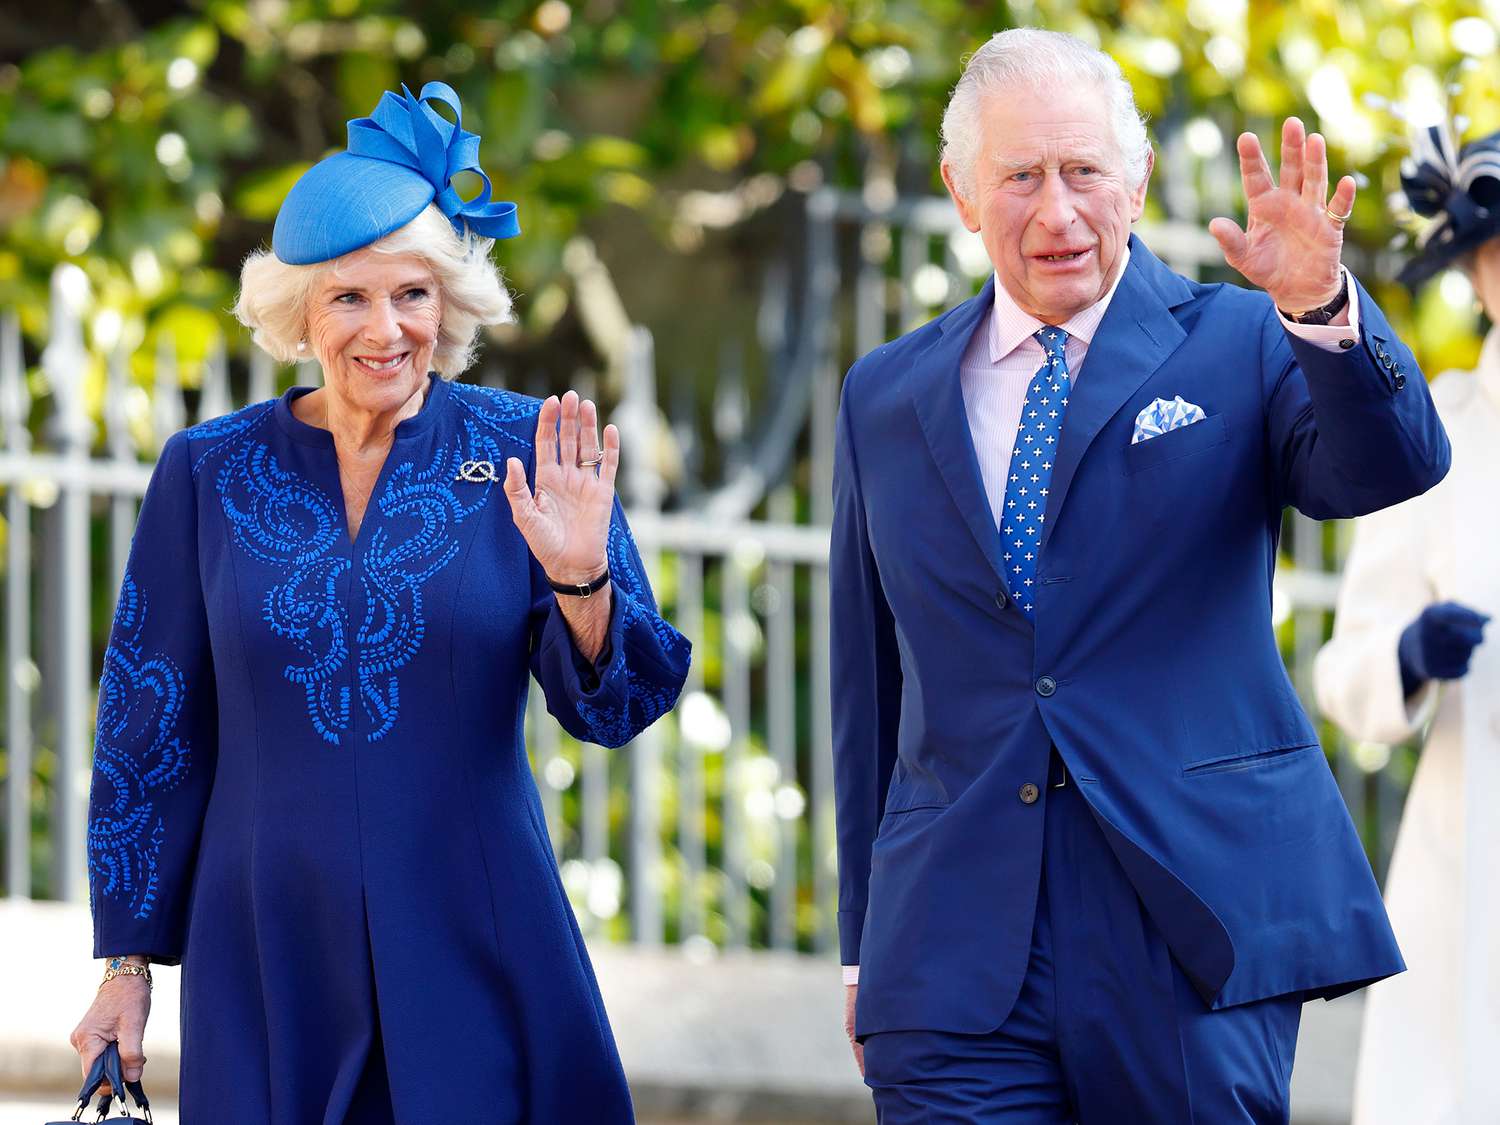 King Charles III and Queen Camilla's Coronation: Guest List Revealed